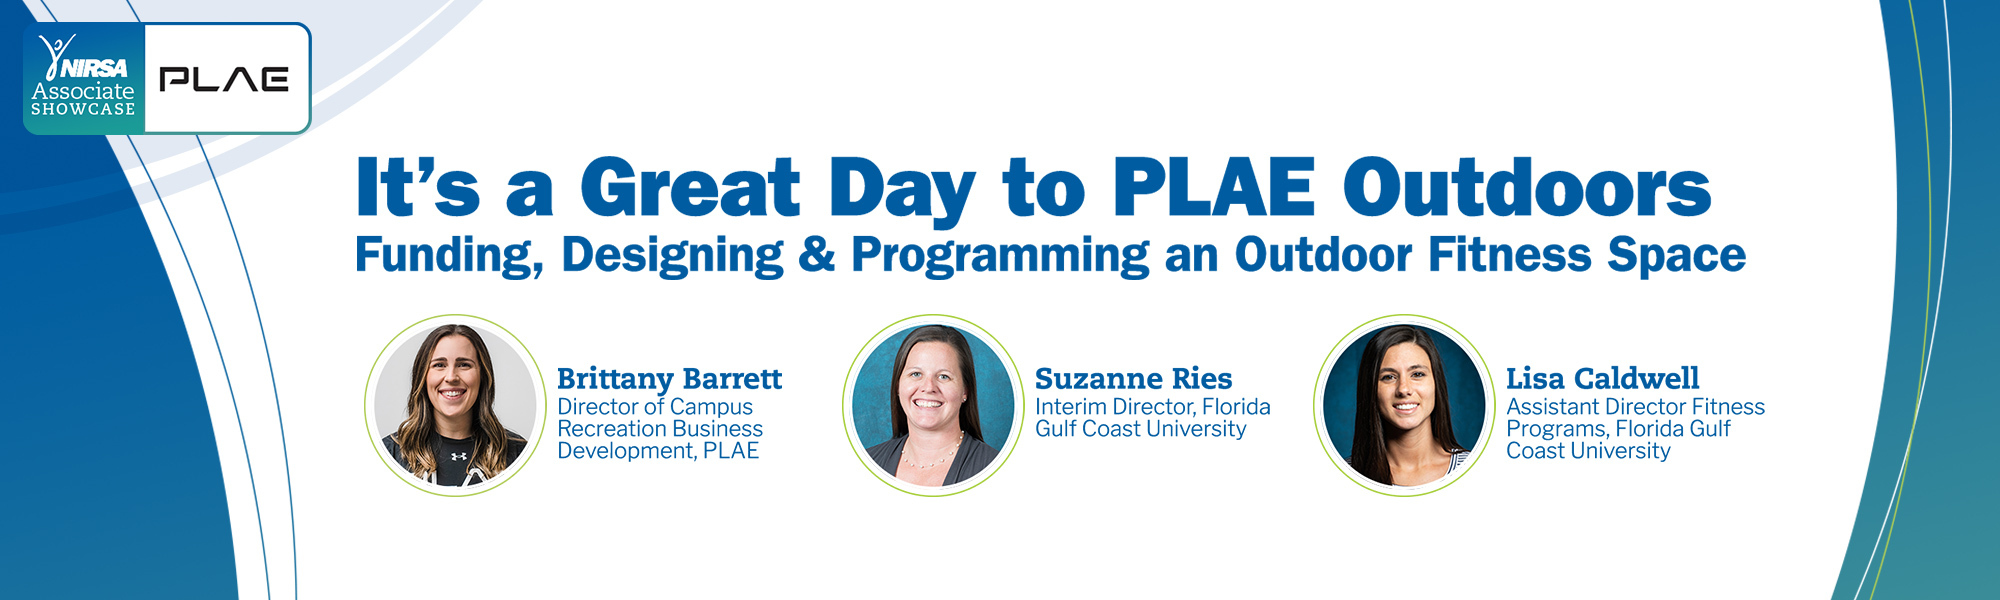 It’s a Great Day to PLAE Outdoors: Funding, Designing & Programming an Outdoor Fitness Space